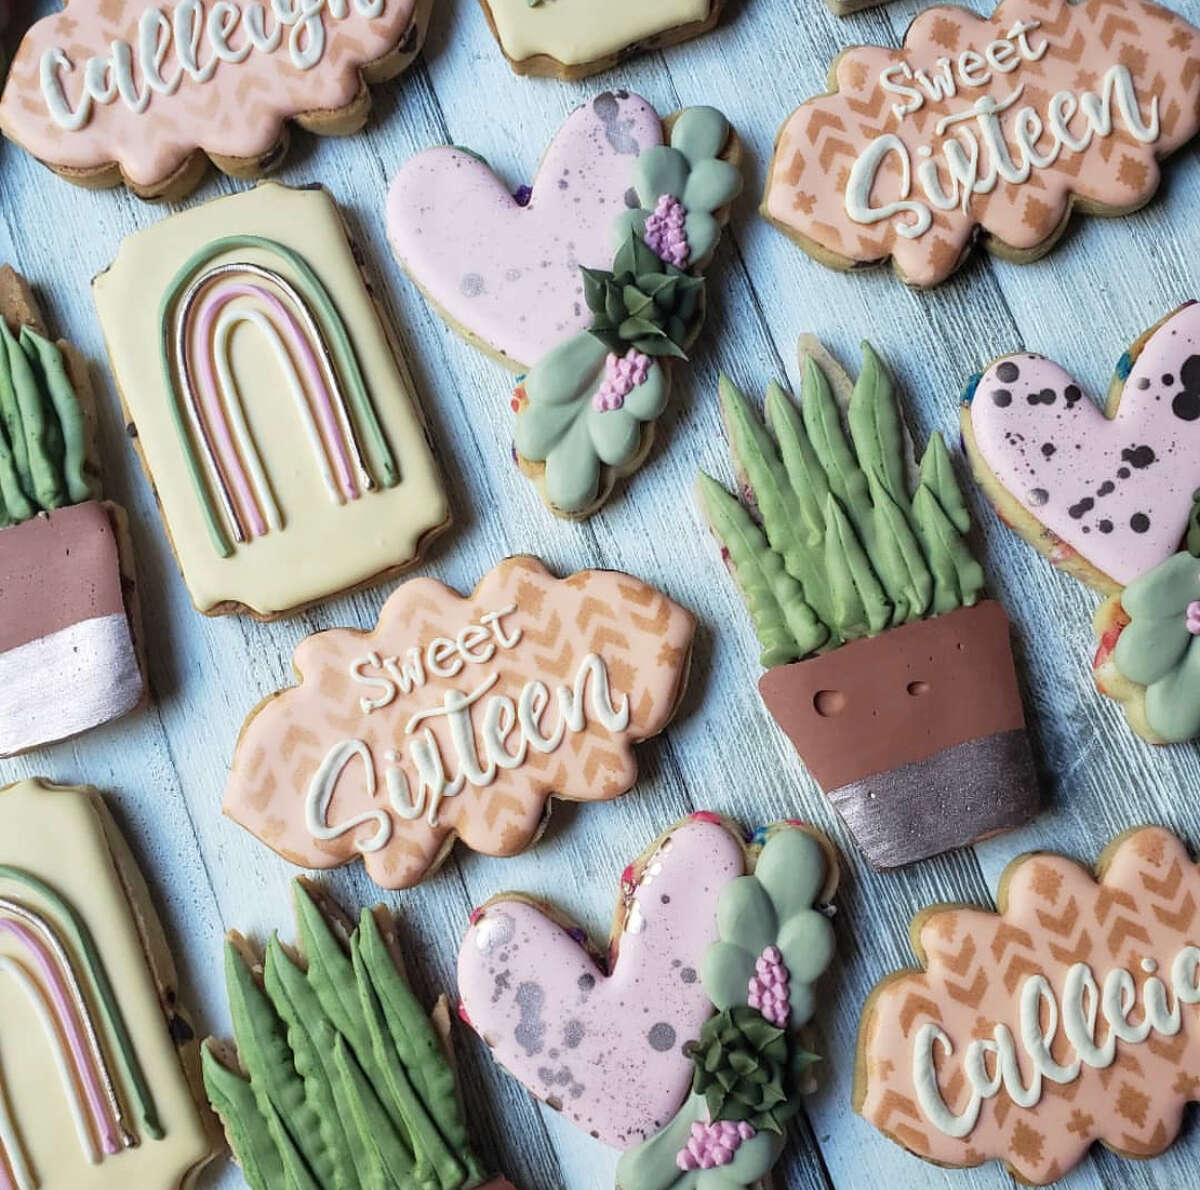 Cookies created by Victoria Casinelli